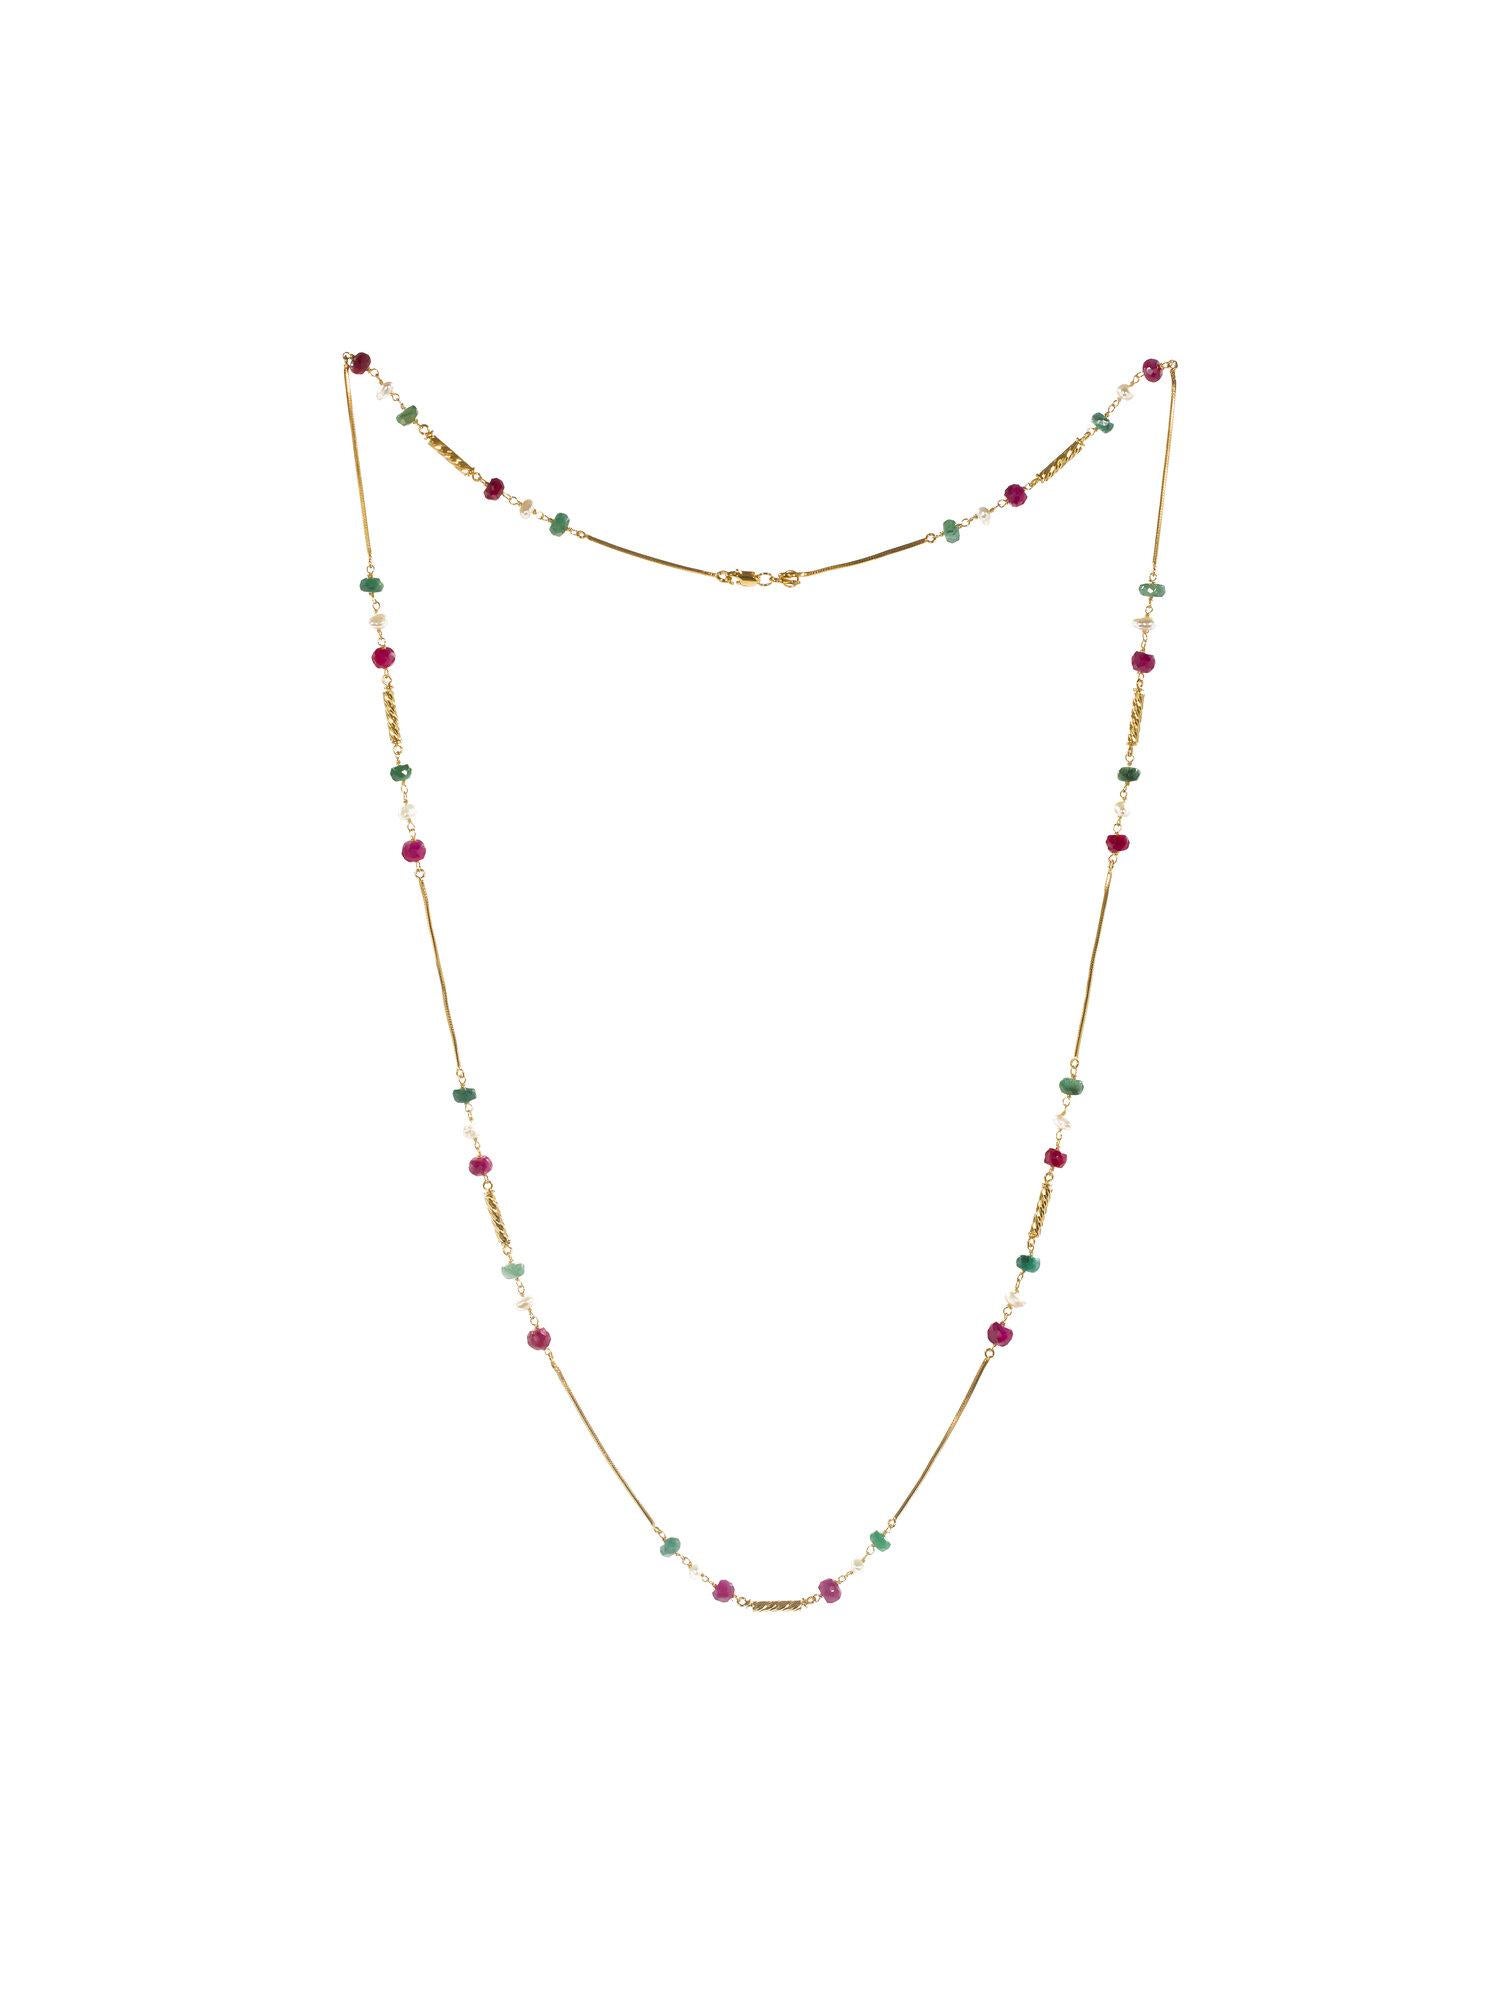 18/22K gold necklace, delicately adorned with pearls, rubies, and emeralds. Inspired by the colors of traditional Bedouin jewelry, Marriyeh pays homage to the mothers of our nation.

